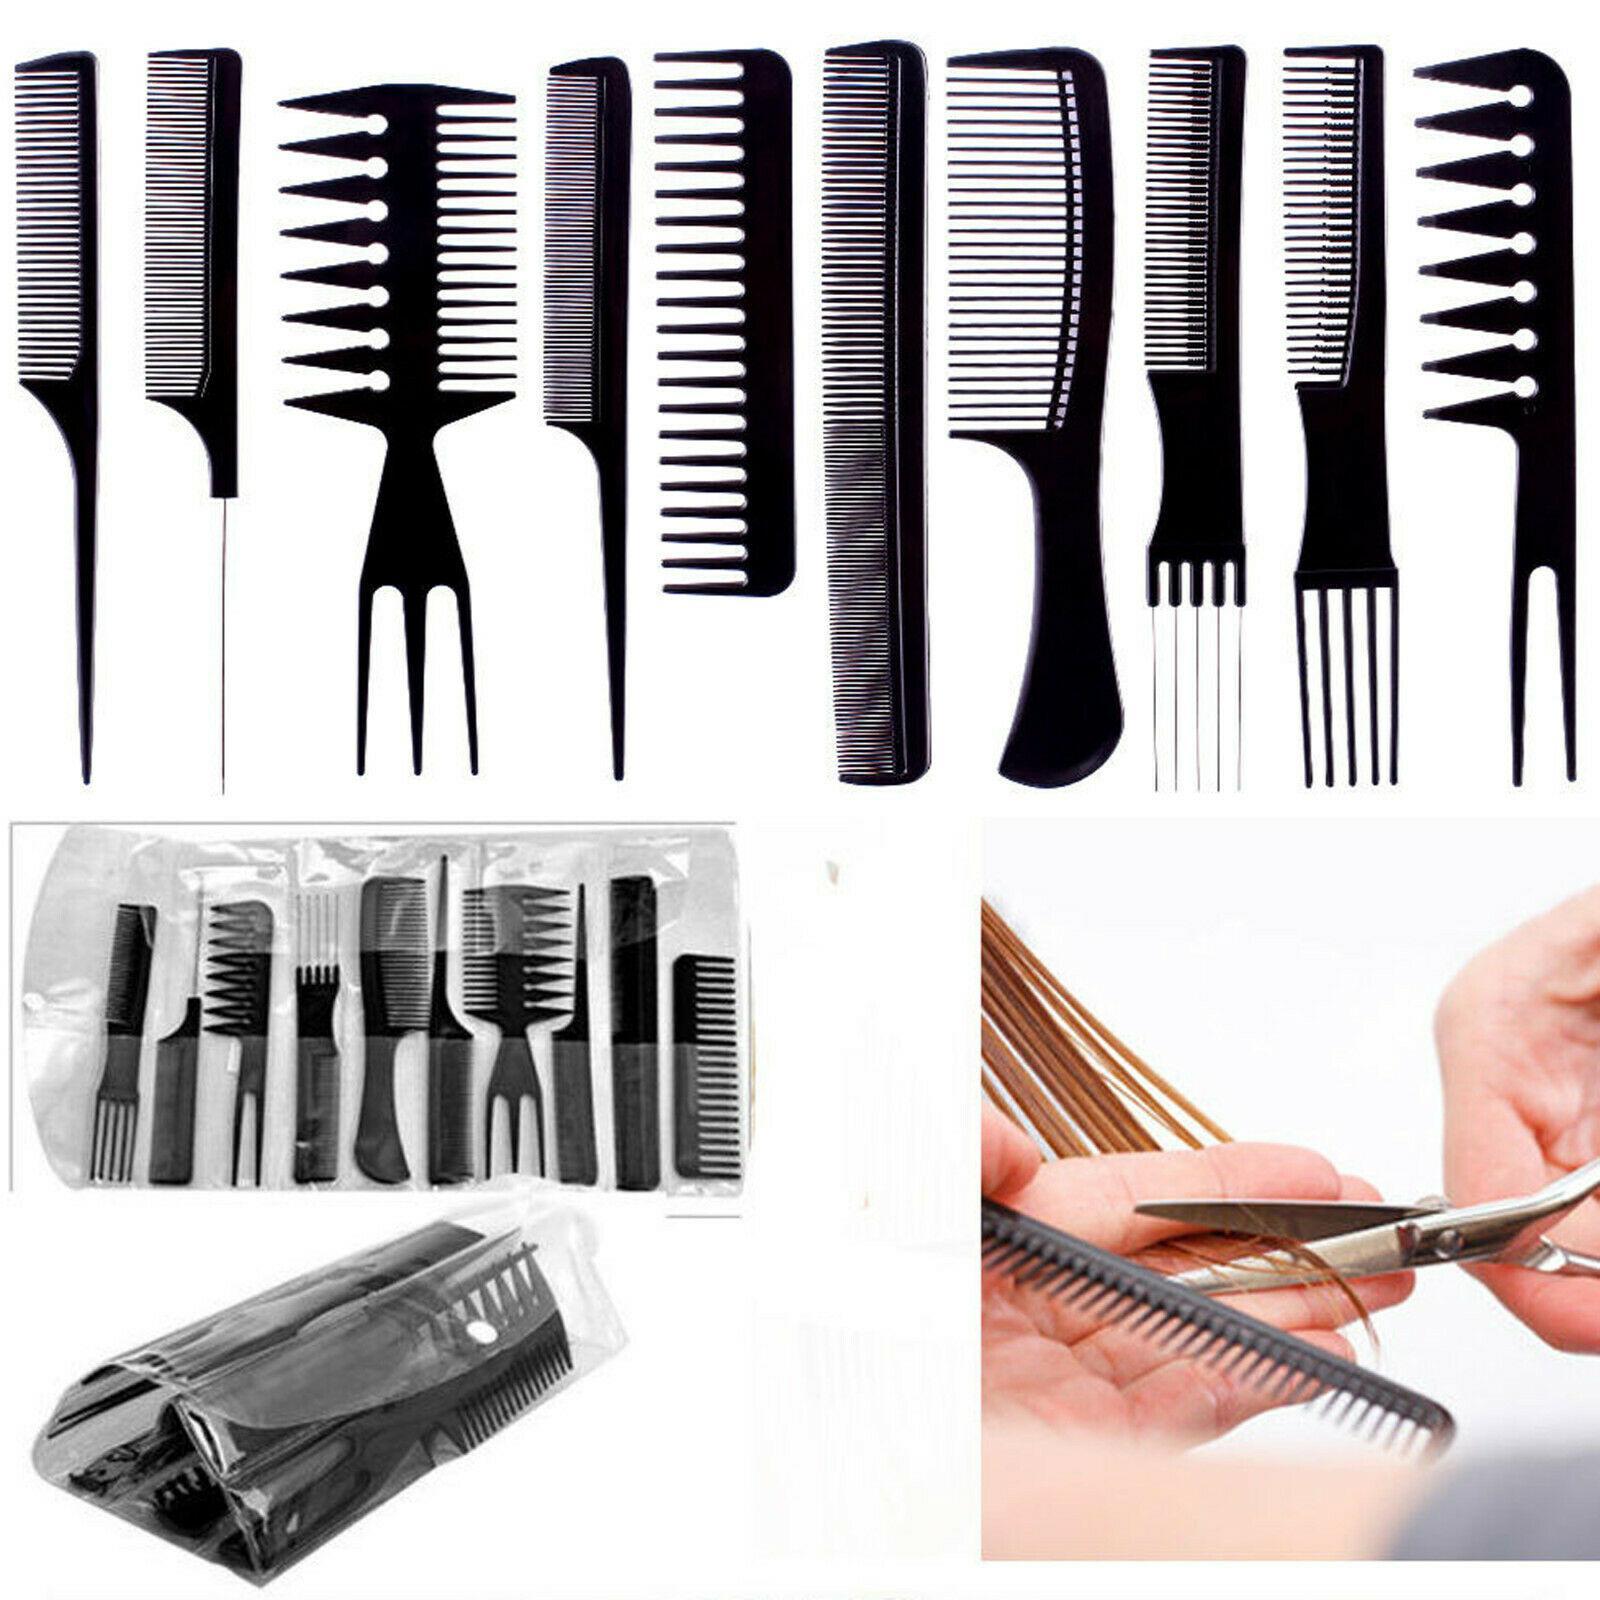 10 pieces Black Professional Combs Hair Salon Hair Styling Barbers Comb Set Kit Rat Tail Comb